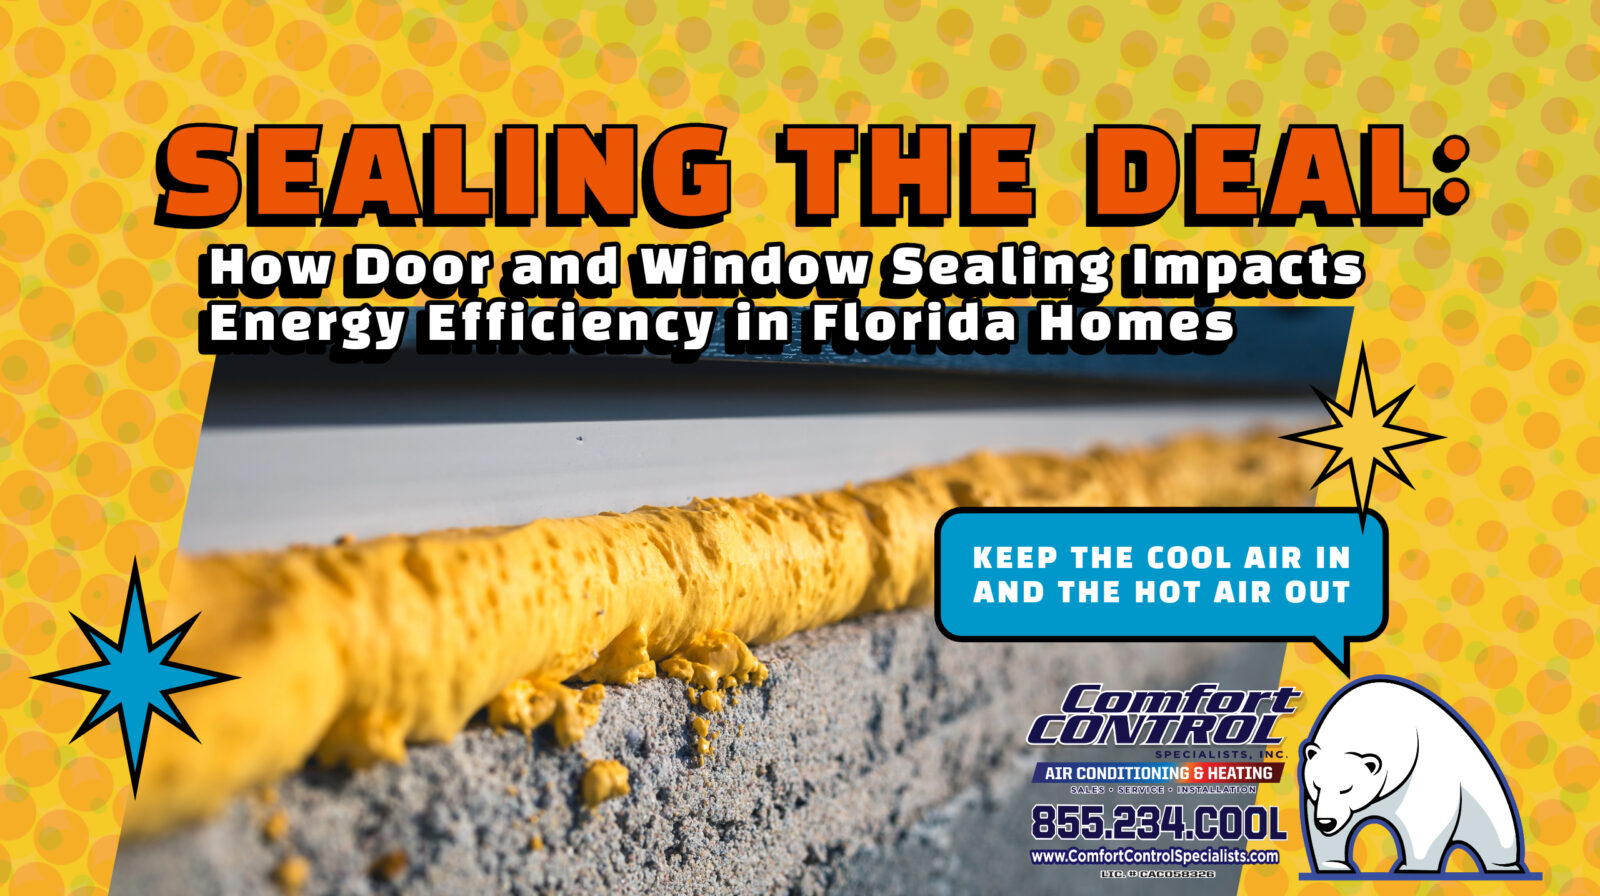 Sealing the Deal: How Door and Window Sealing Impacts Energy Efficiency in Florida Homes